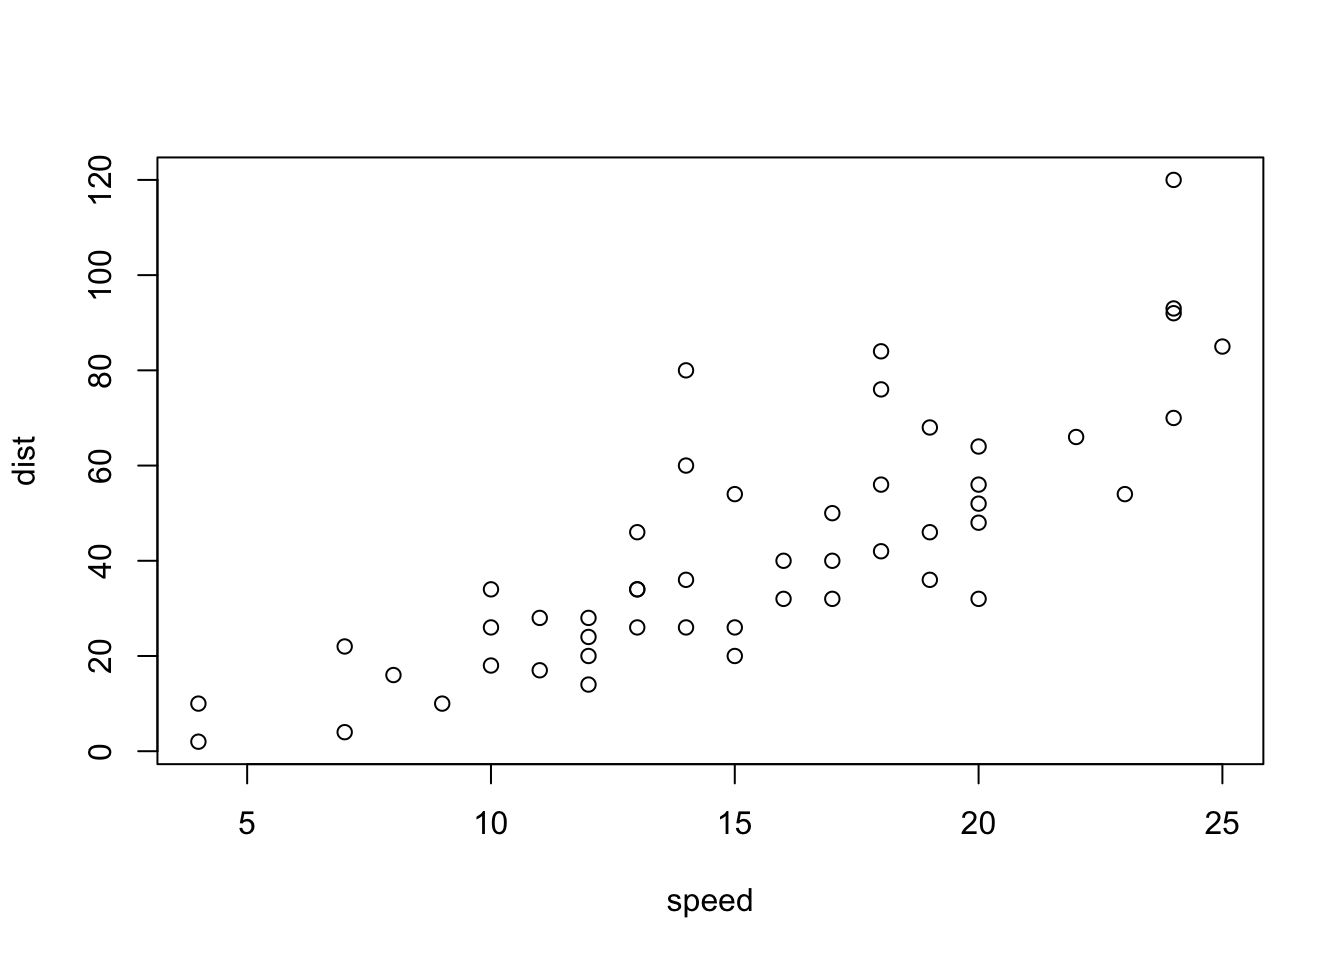 Plot of cars' speed in relation to distance.